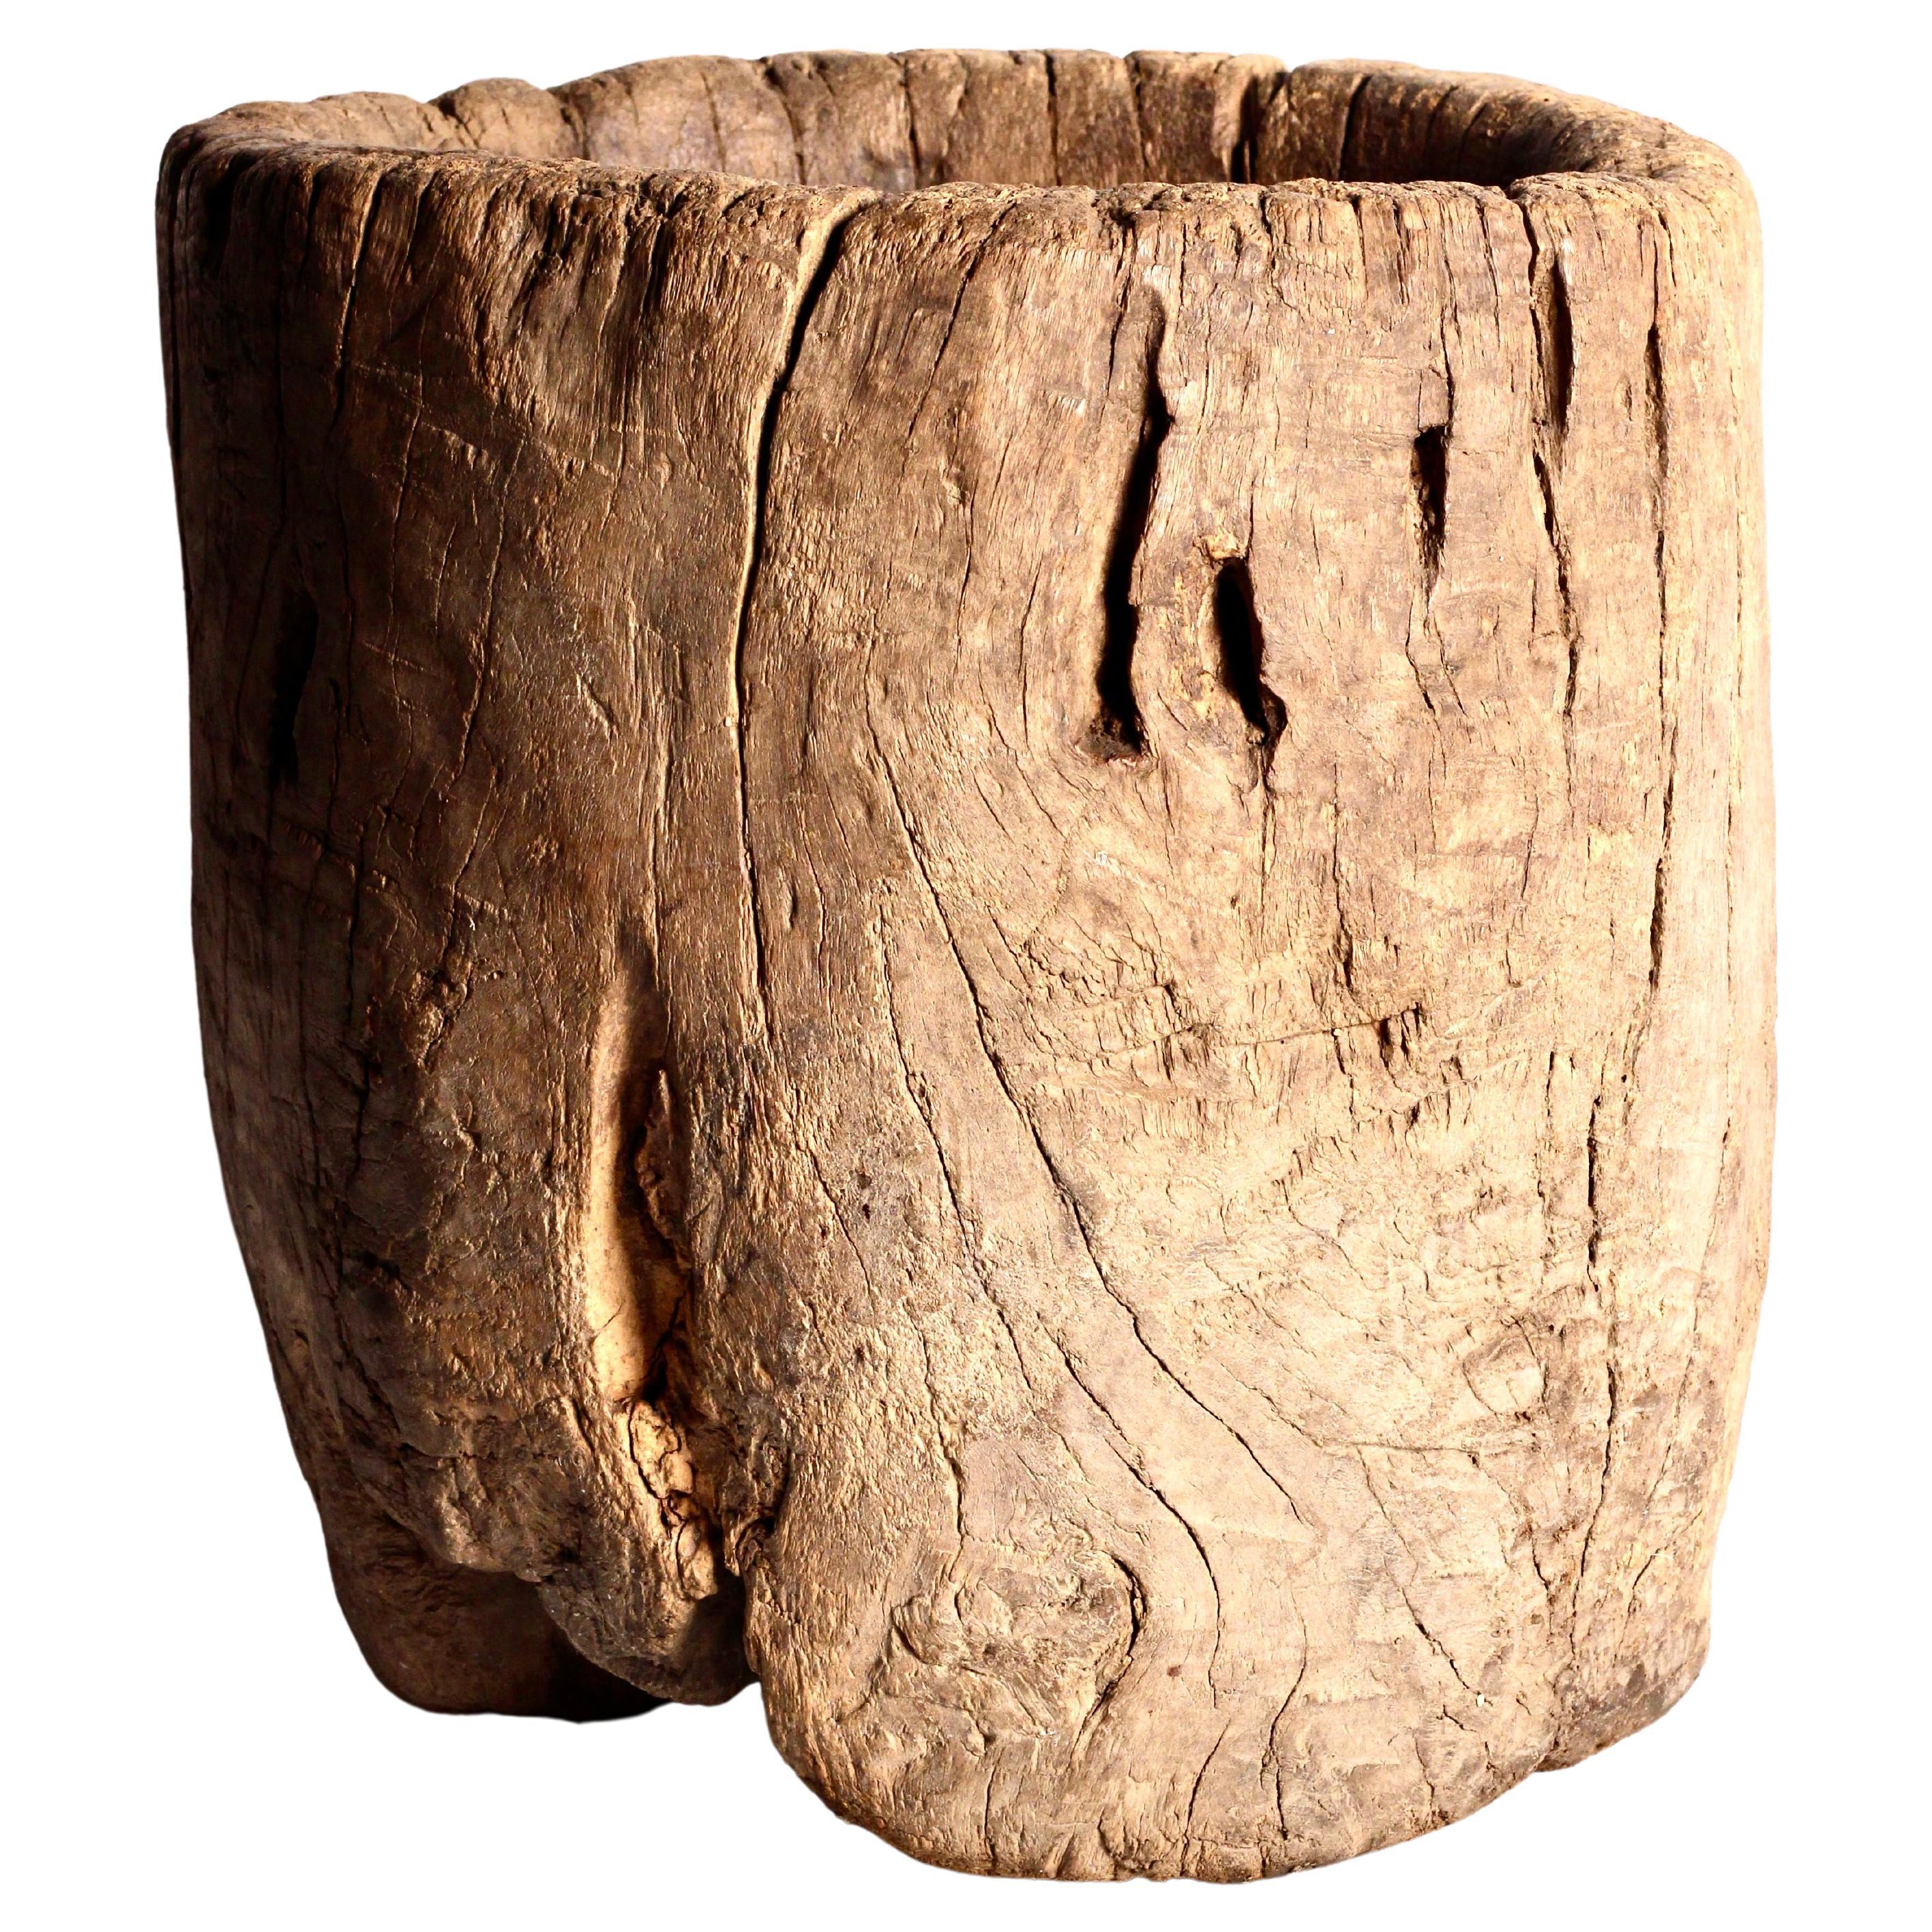 Rustic Elm Wooden Large Mortar Bowl Hand Carved from One Piece of Tree Trunk For Sale